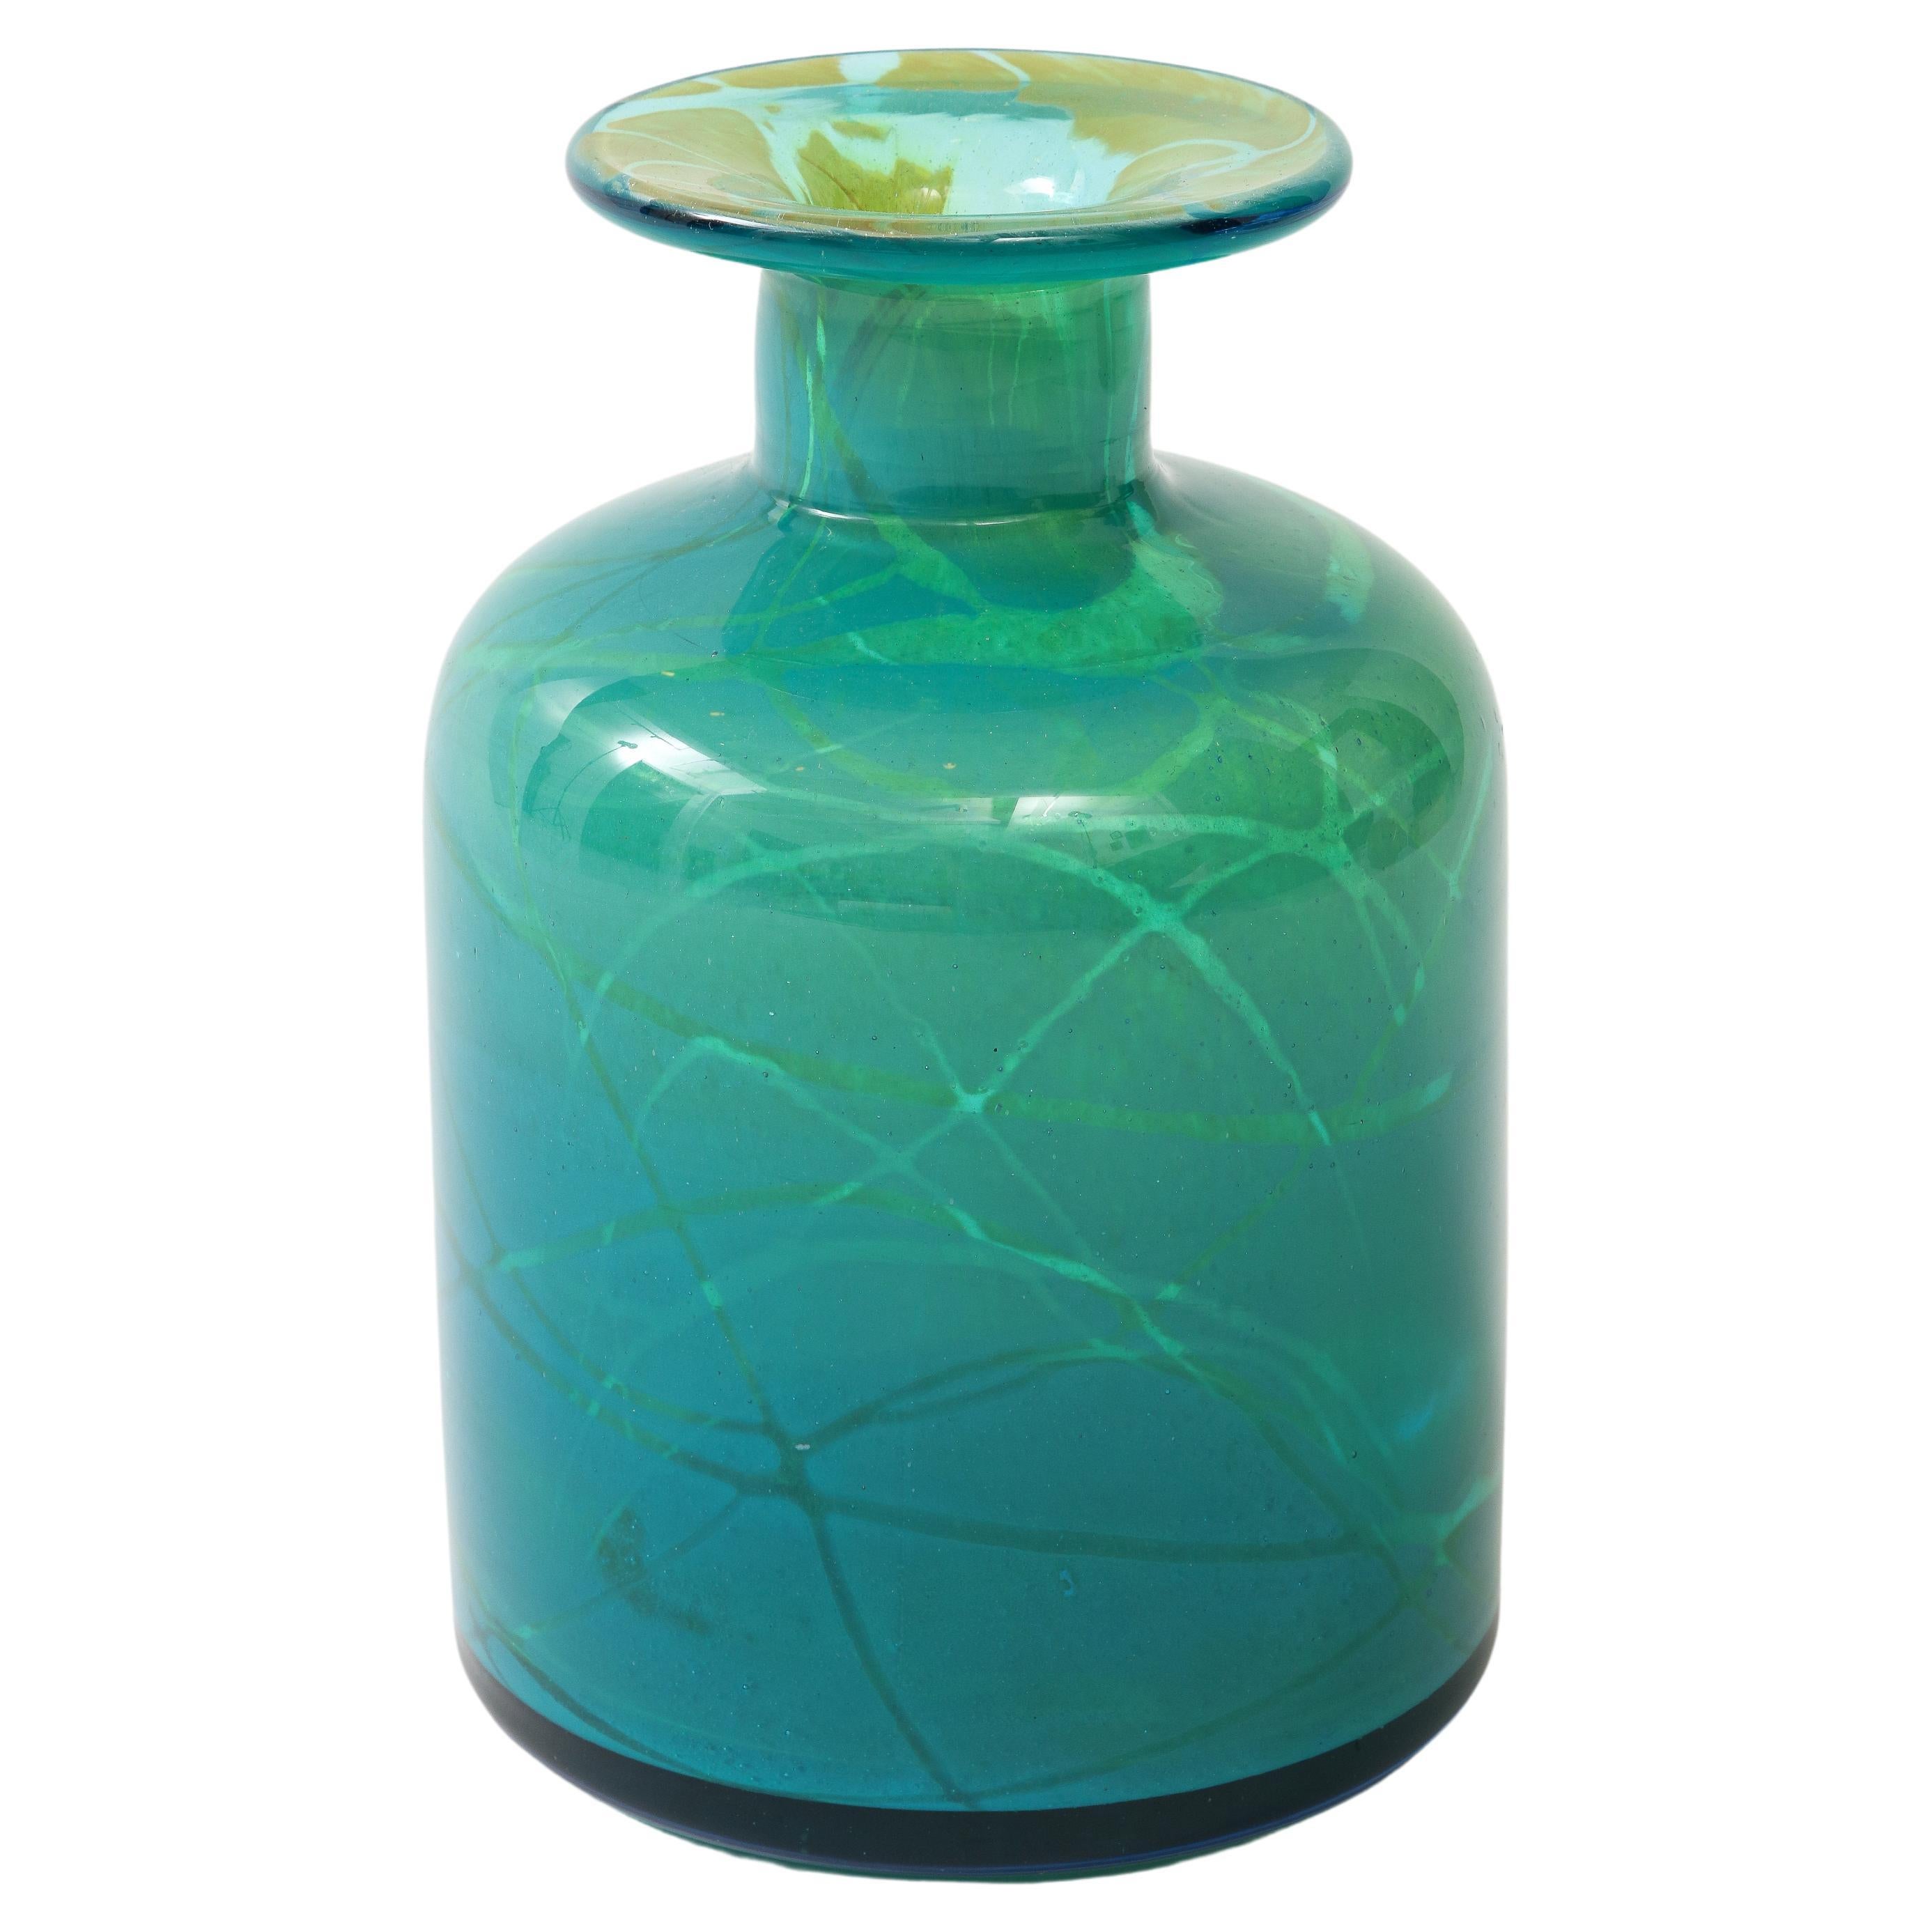 A typical vibrant blue Mdina glass bottle
shape vase by Micheal Harris.